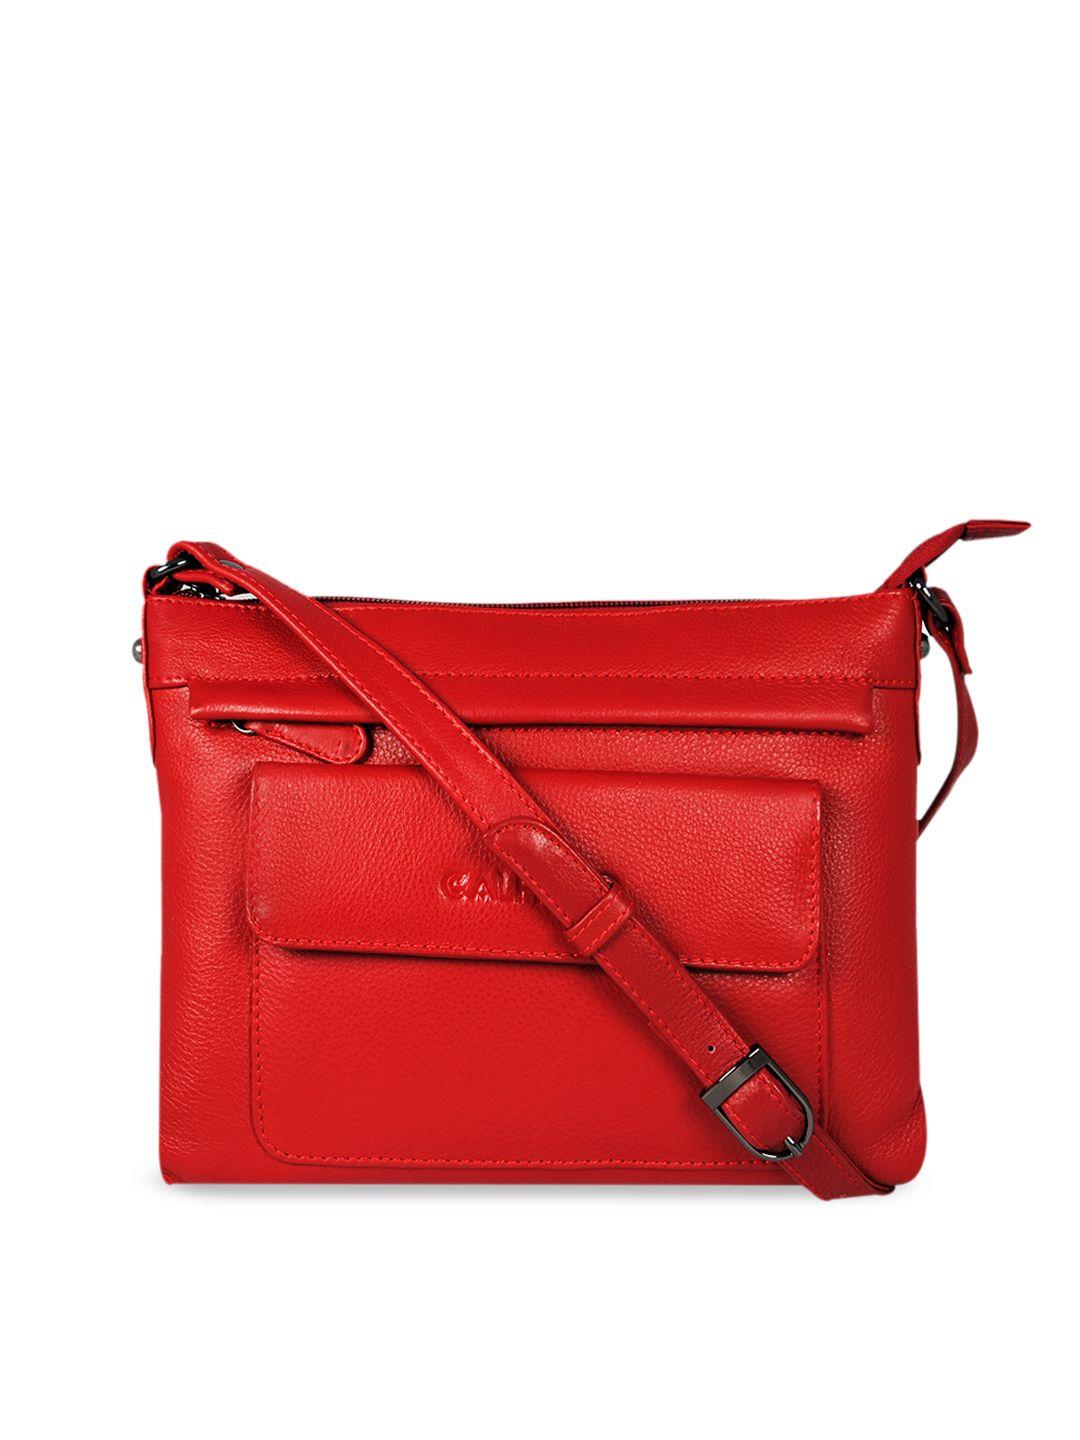 calfnero red leather structured sling bag